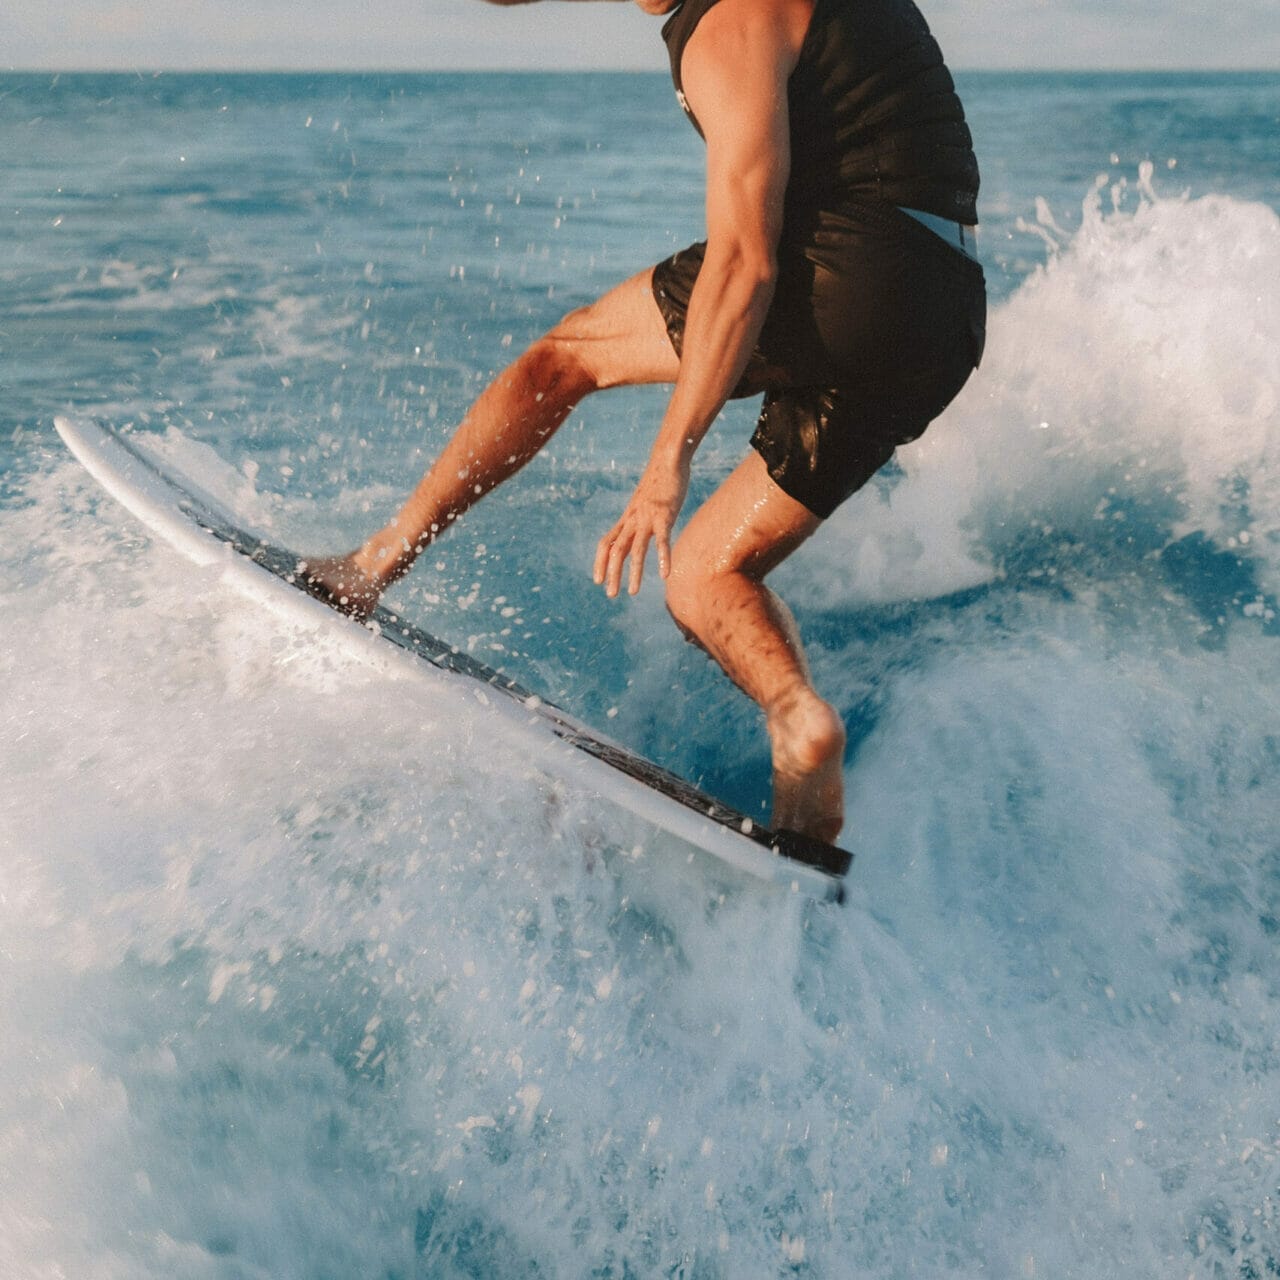 A man riding a wave on a surfboard behind a wakesurf boat.